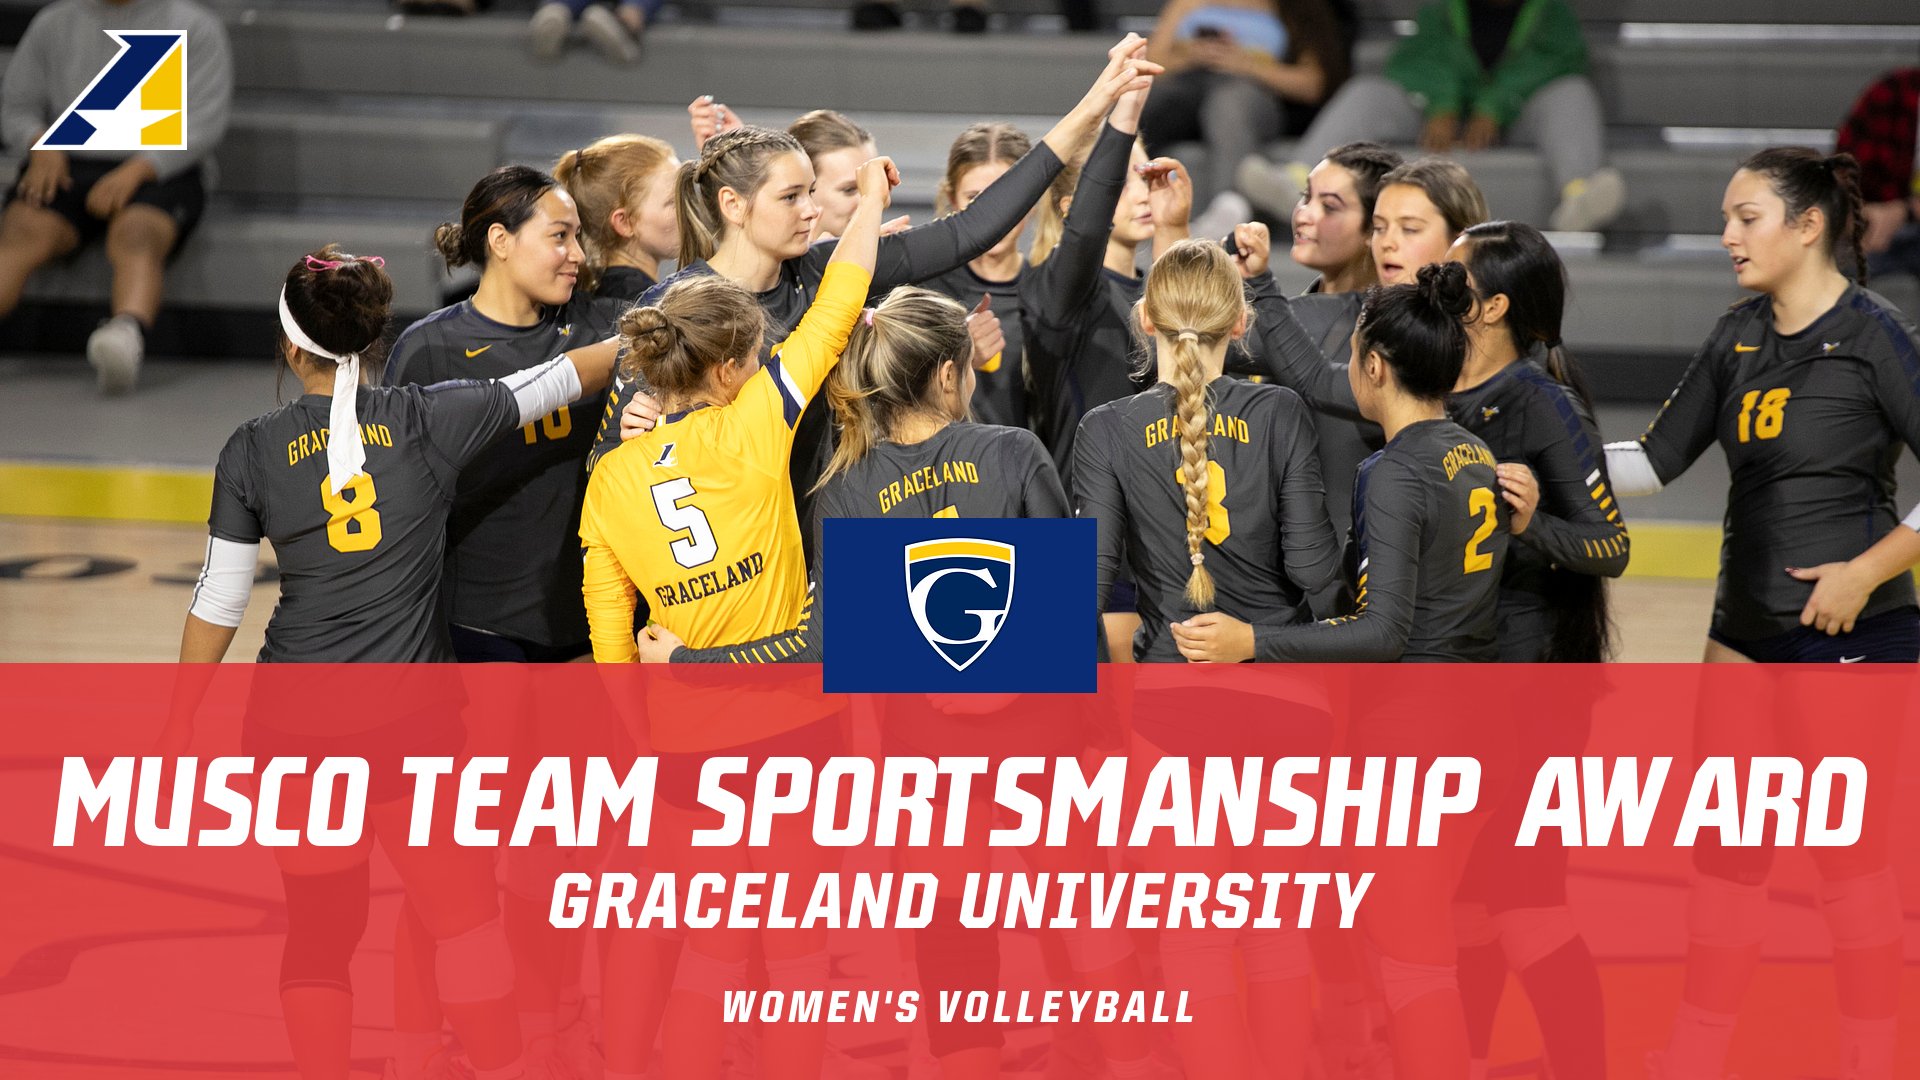 Graceland Women&rsquo;s Volleyball Selected for the Musco Team Sportsmanship Award